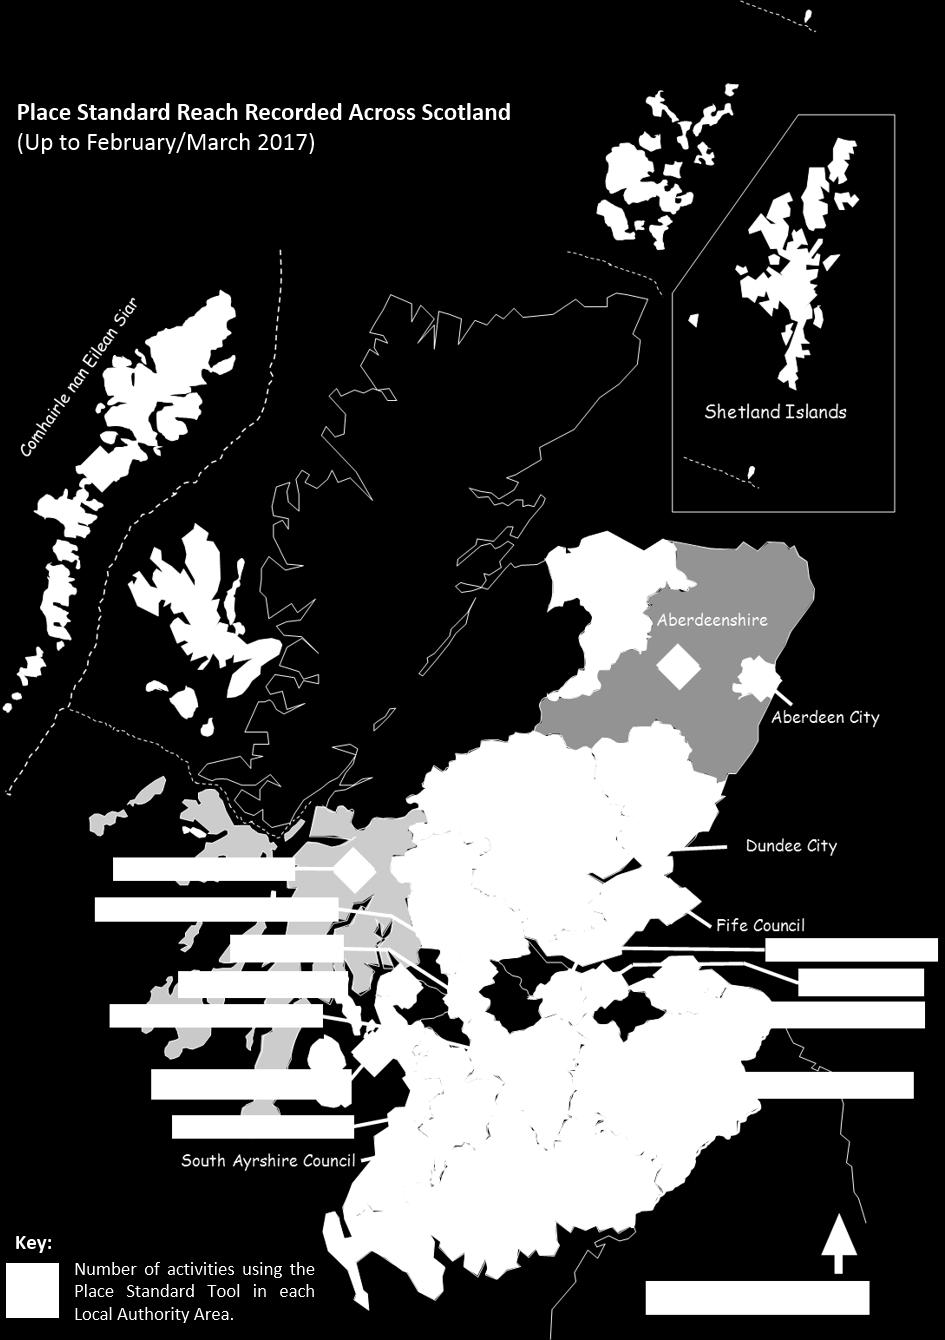 The reach of the Place Standard across Scotland is shown below.